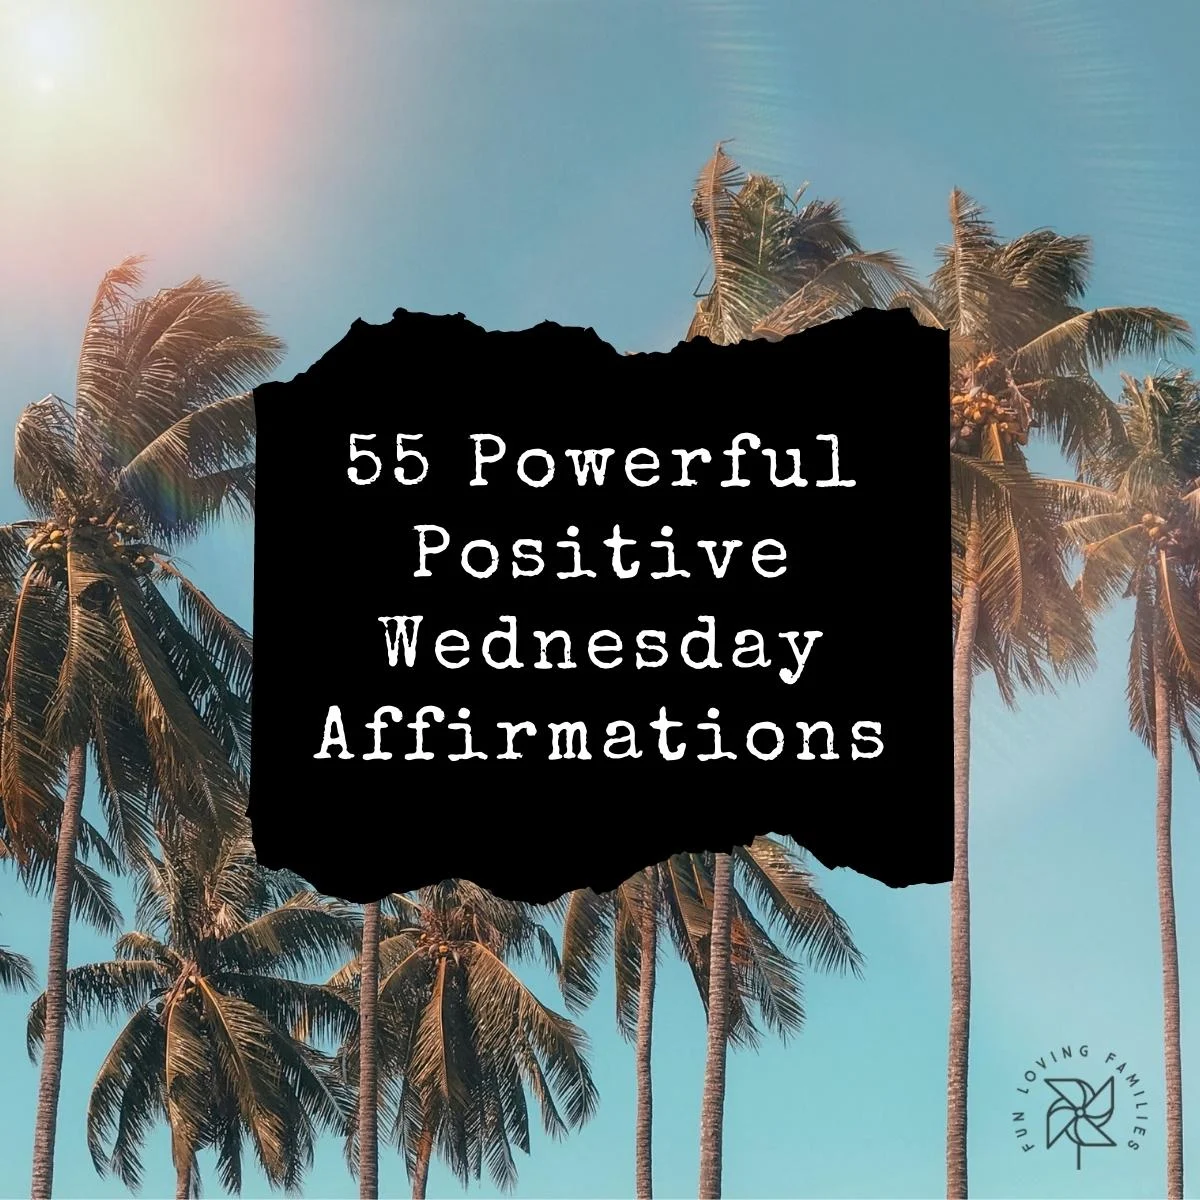 55 Powerful Positive Wednesday Affirmations